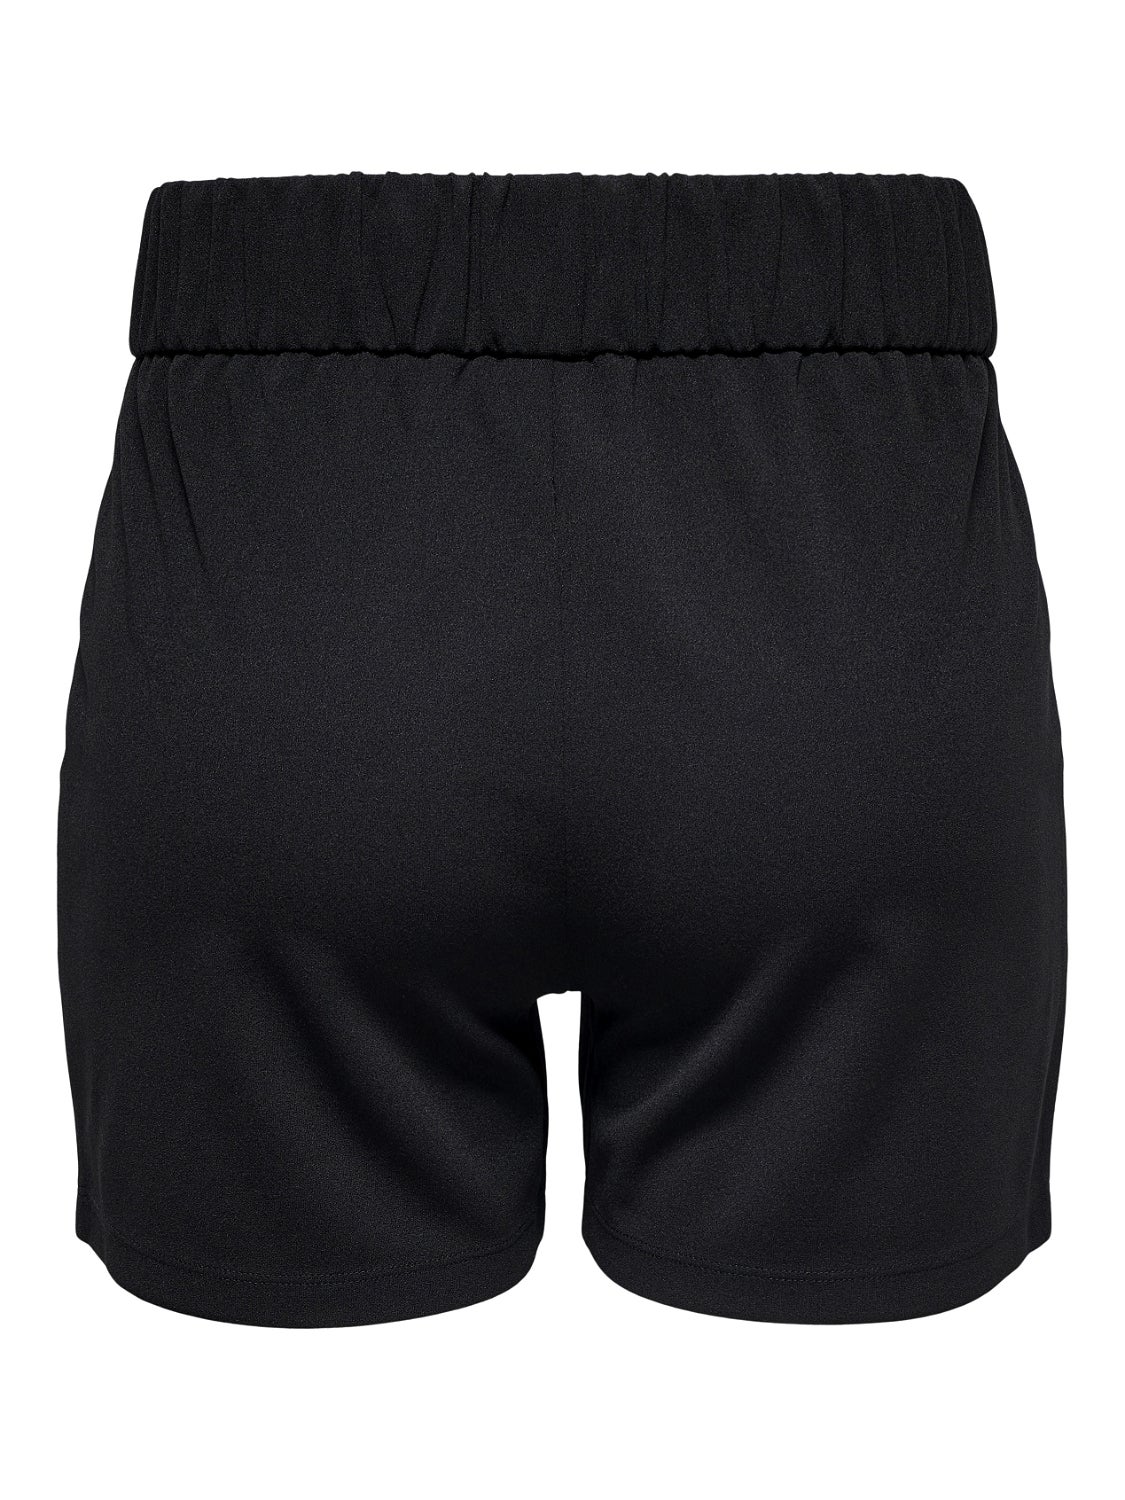 colsie Solid Black Athletic Shorts Size S - 23% off